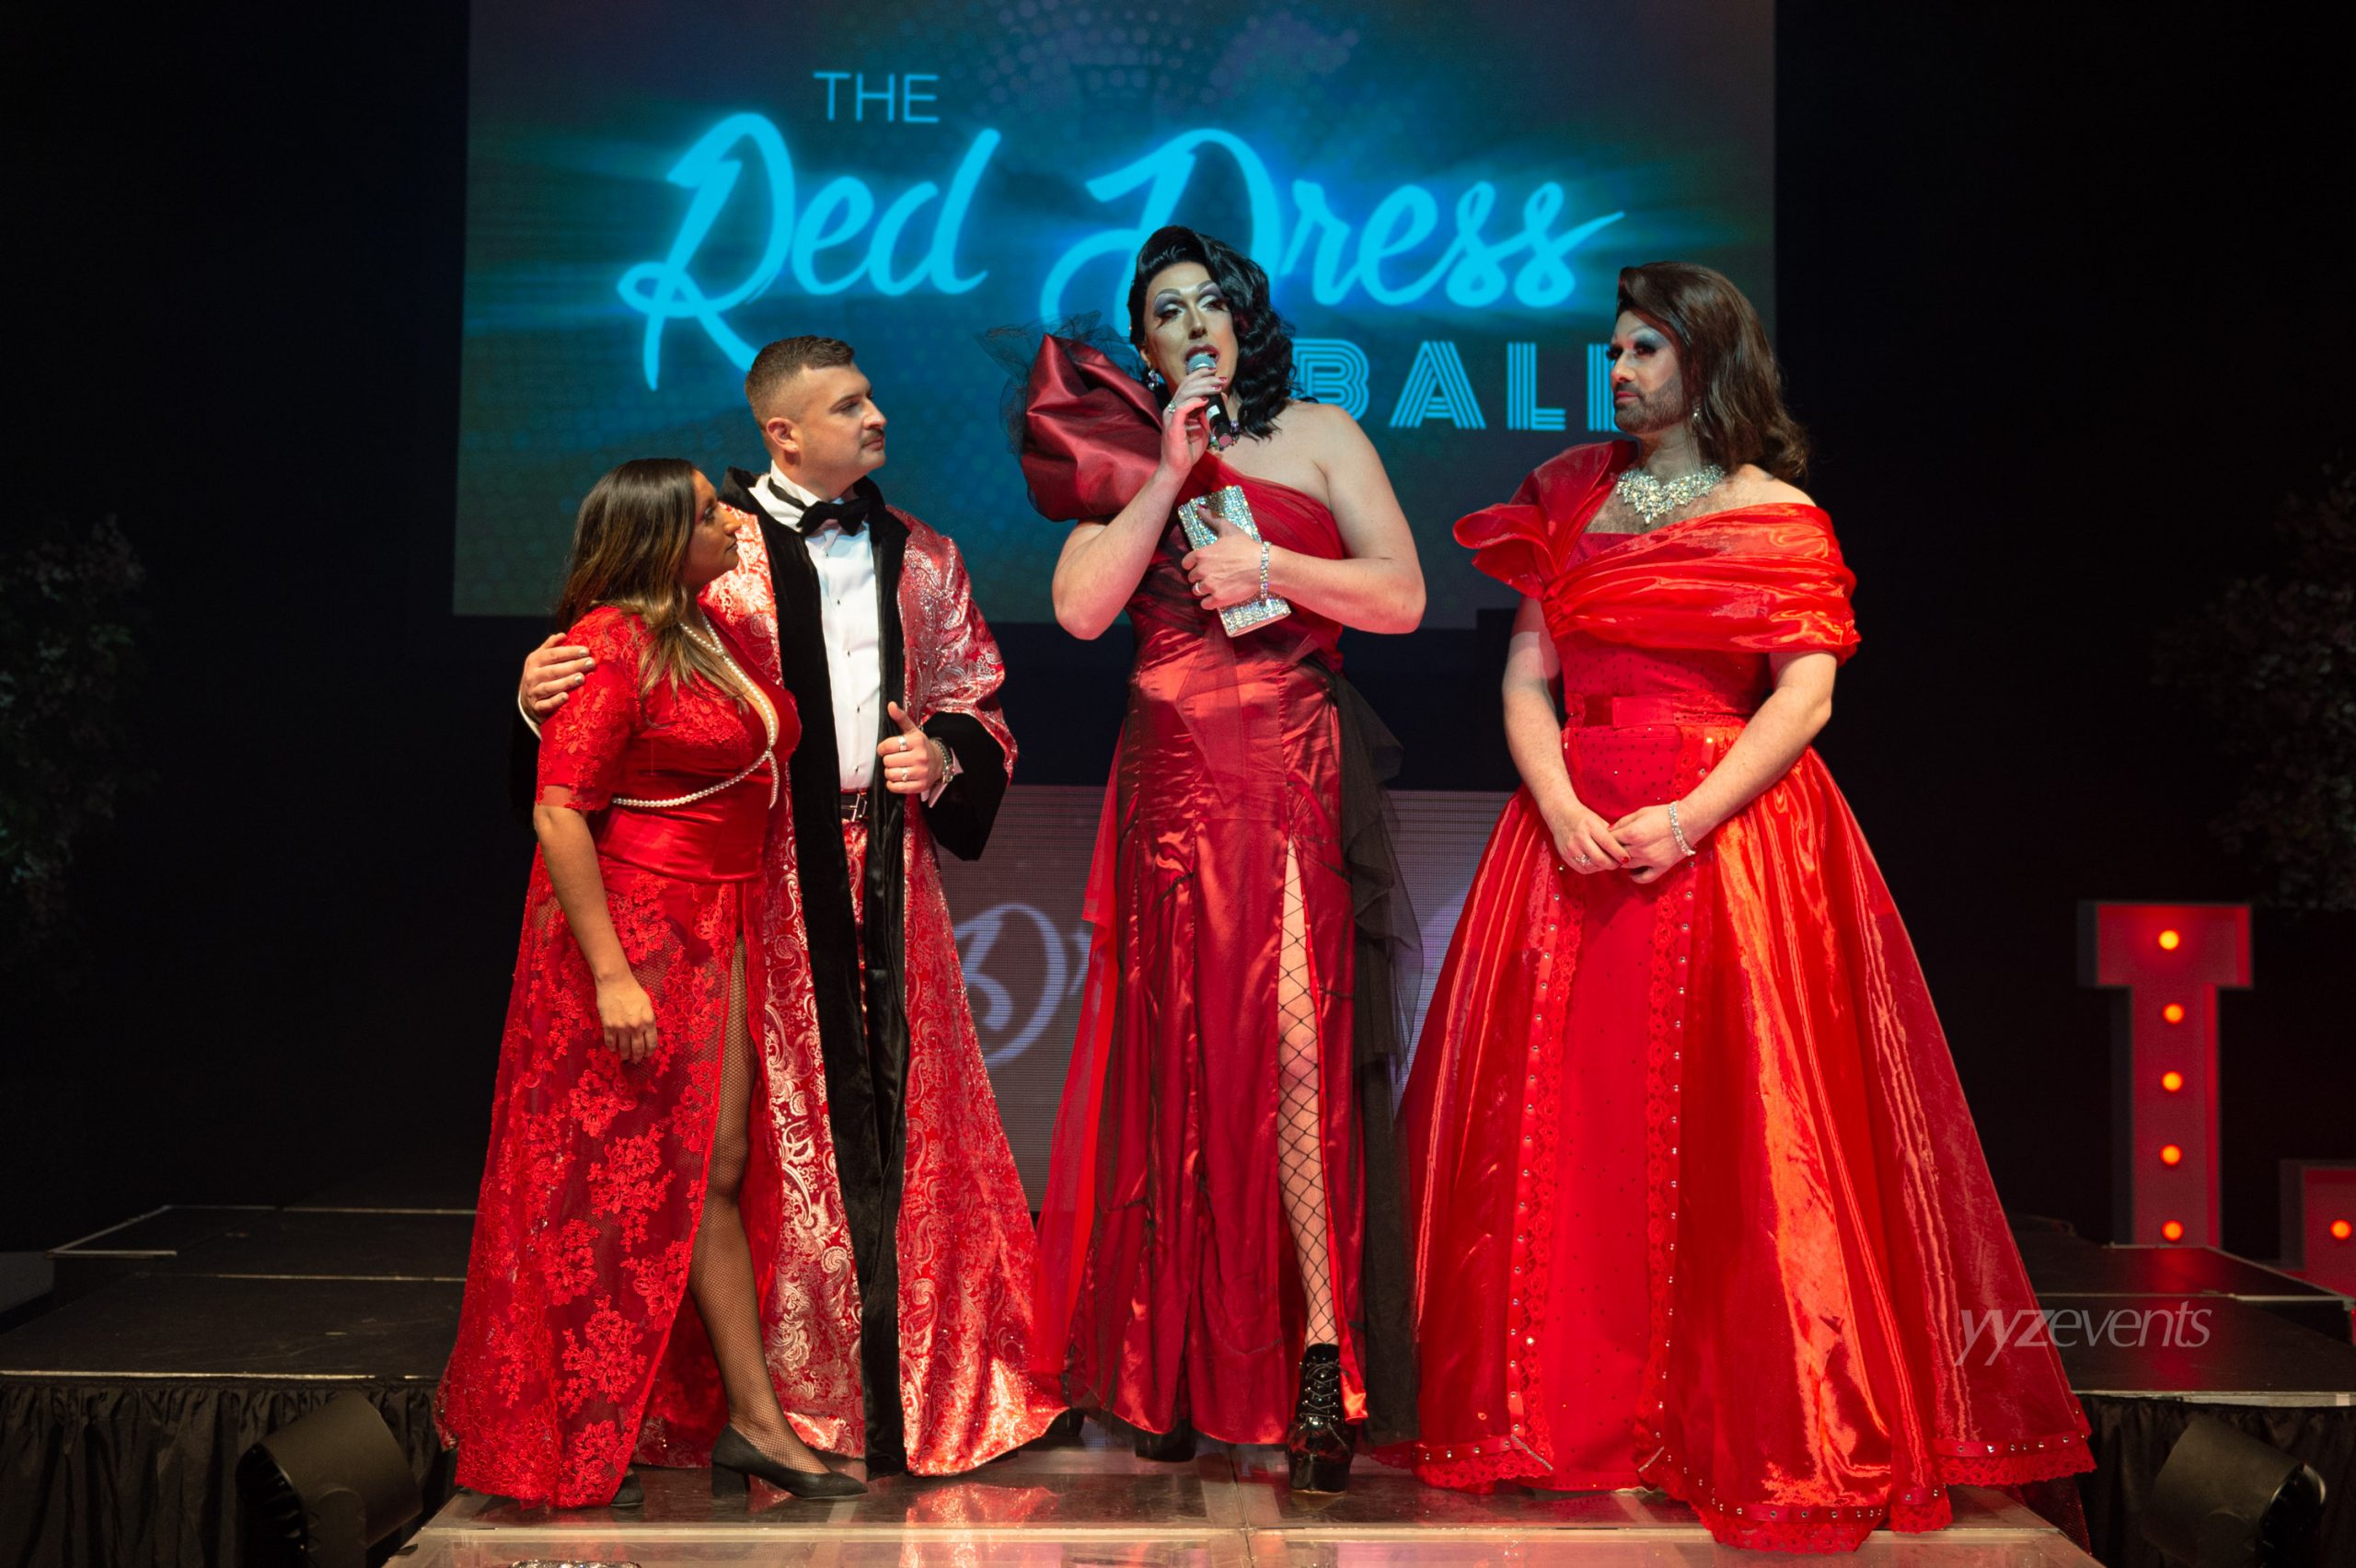 The founders of The Red Dress Ball on stage